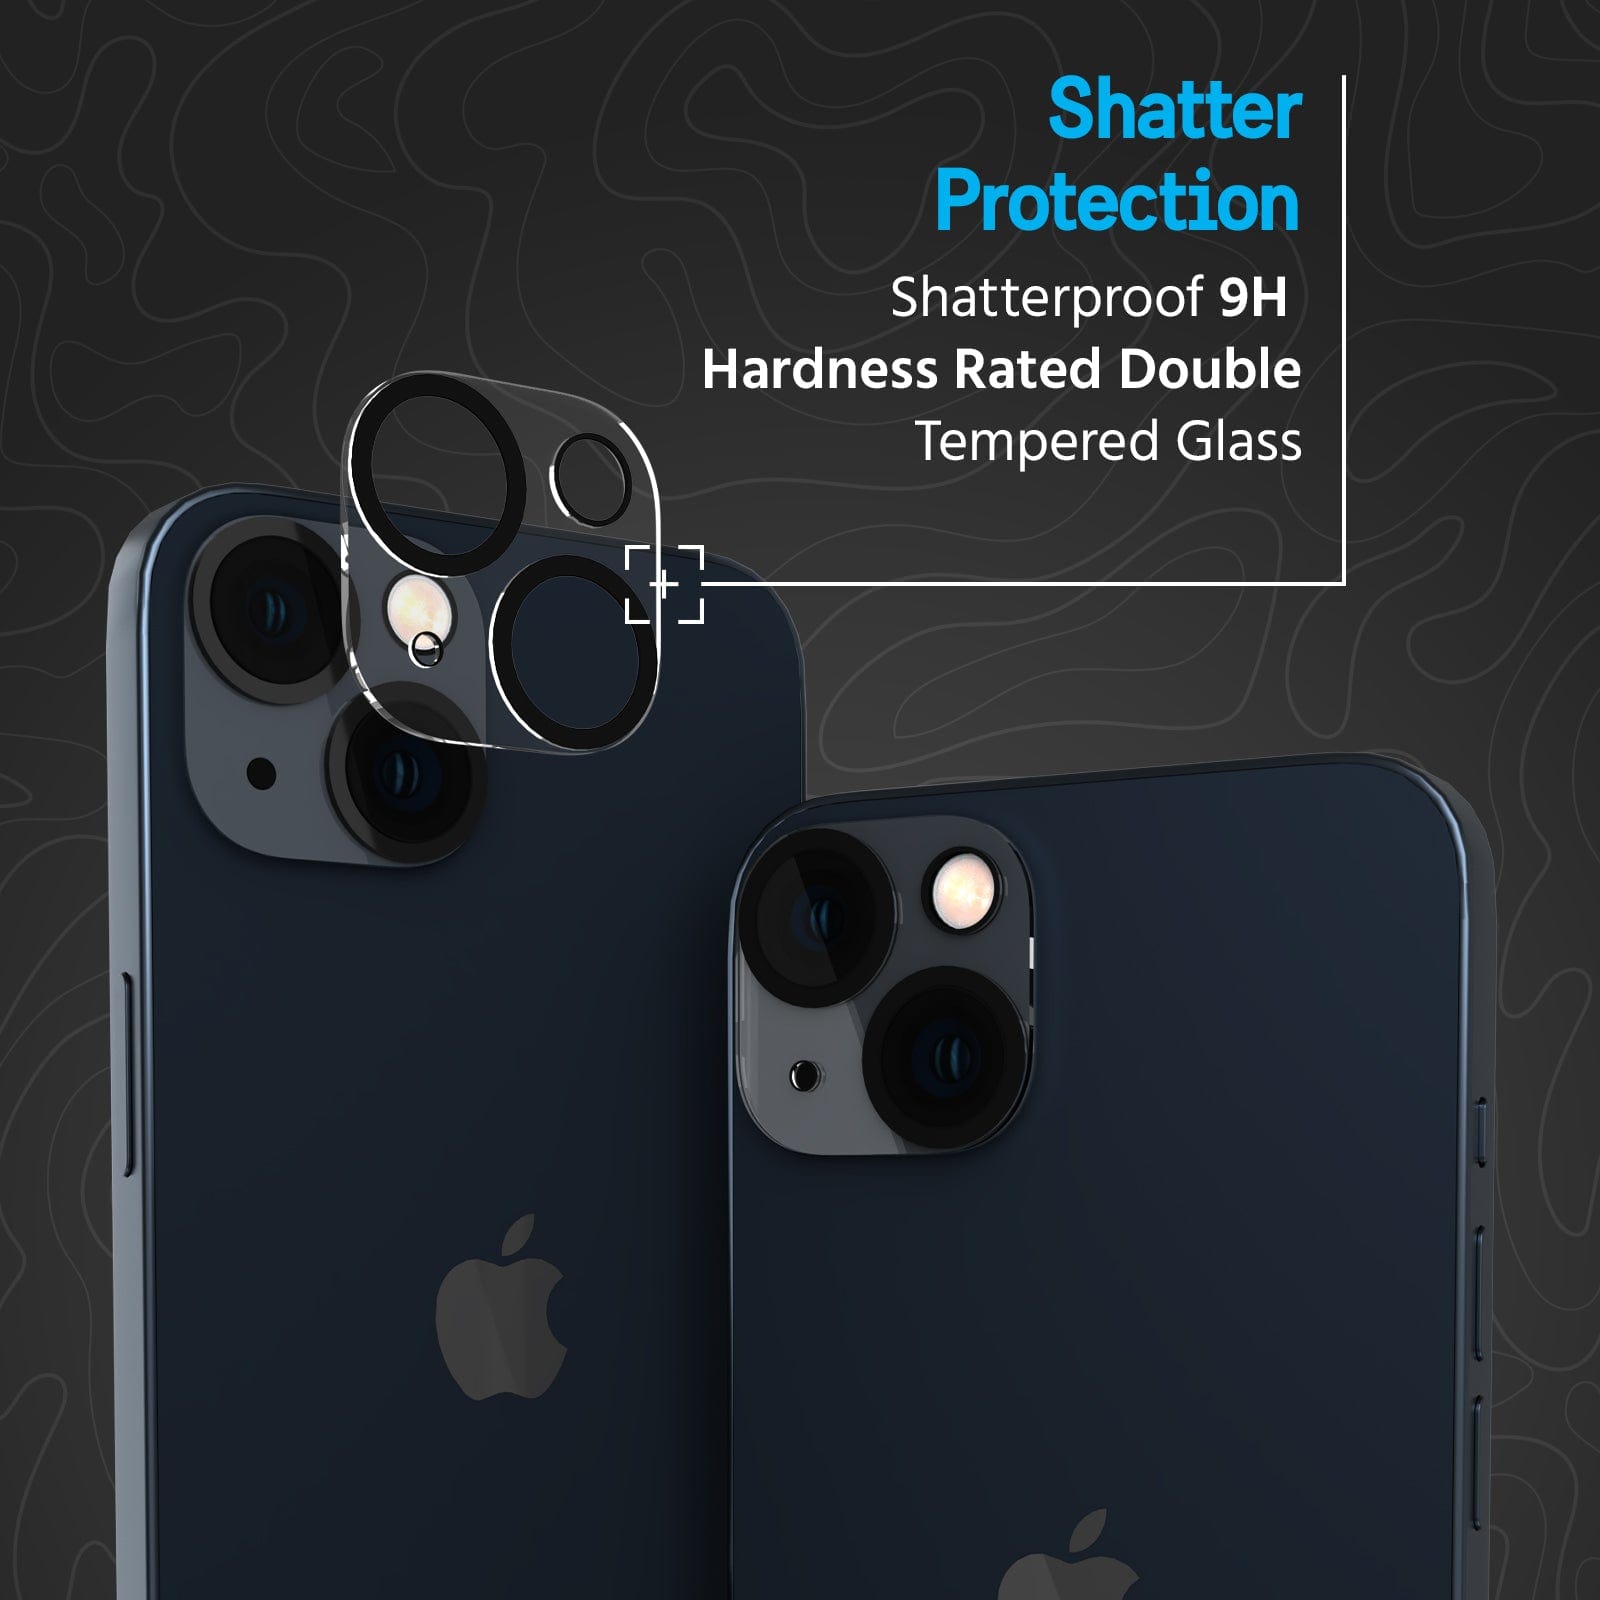 Shatter Protection. Shatterproof 9H Hardness Rated Double Tempered Glass.